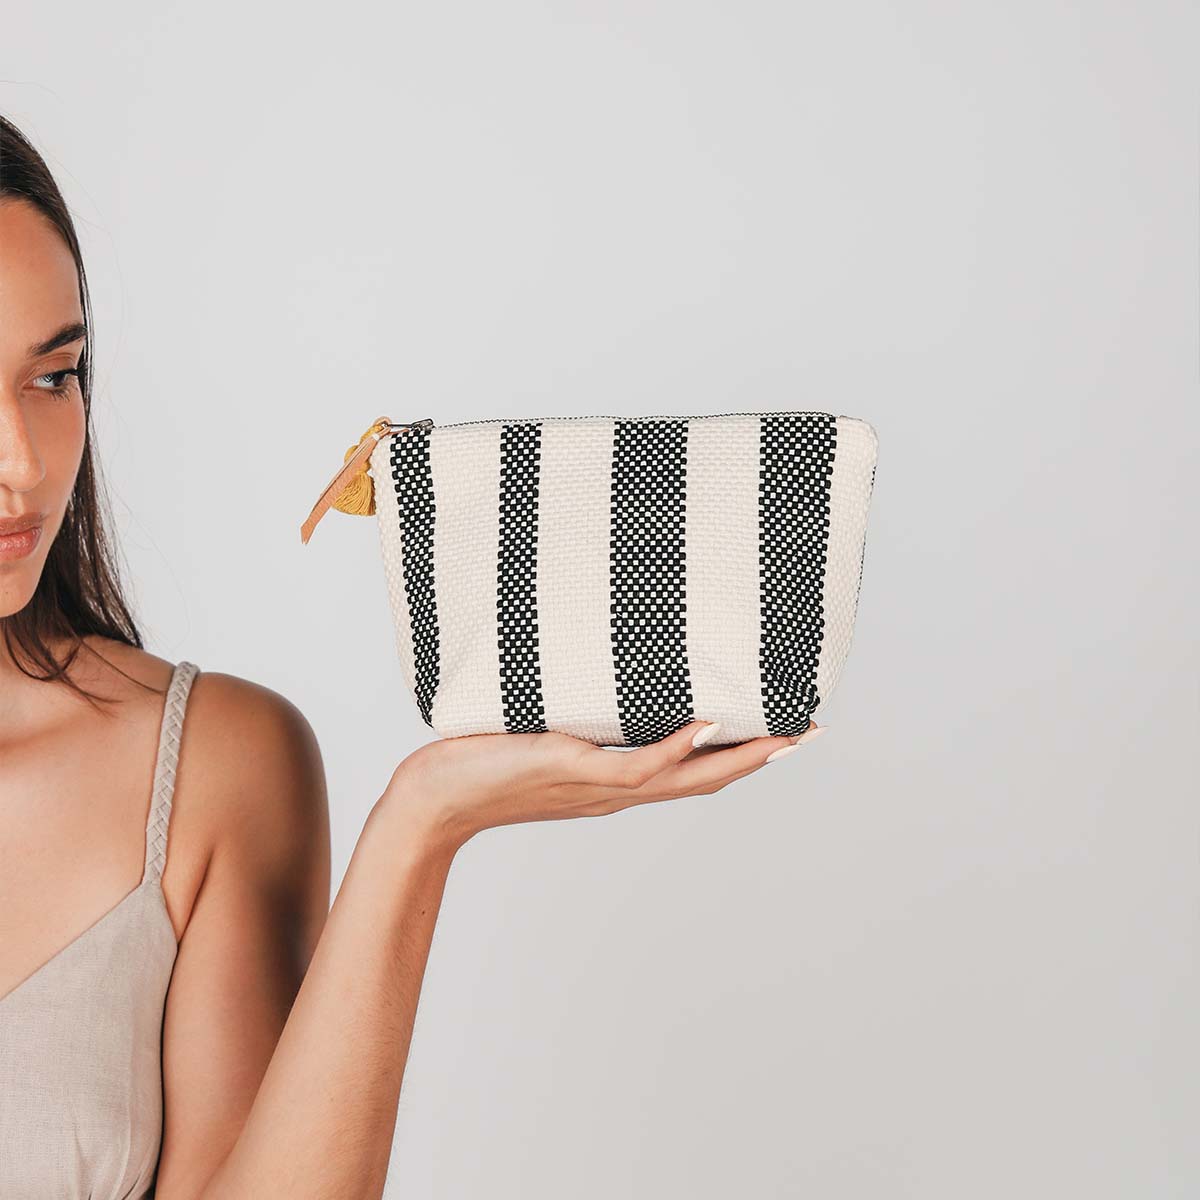 A model holds the hand woven artisan Mini Cristina Cosmetic Pouch in Tourmaline pattern. It shows the front in vertical black and white woven stripes.